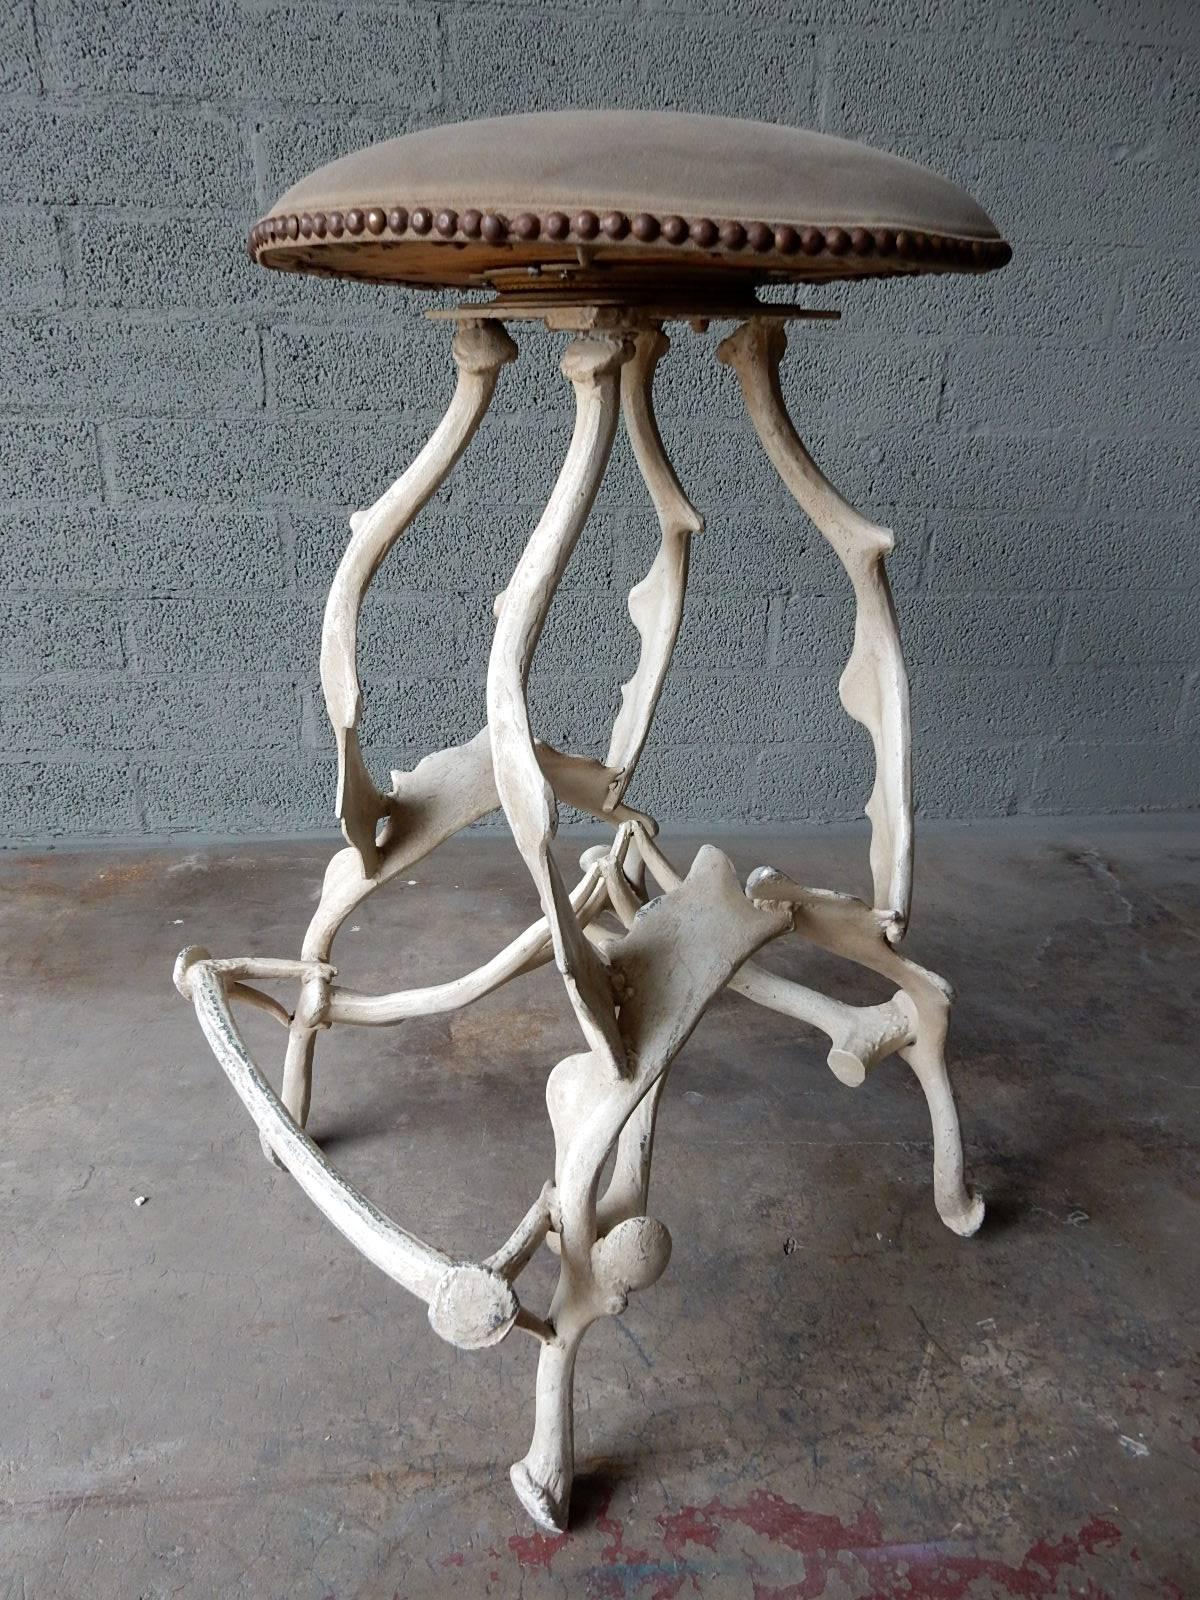 Trio of life-like cast aluminium moose antler bar stools.
Swivel leather-like seats surrounded with brass tack heads. Creamy white enamel with nice aged patina.
As cool as a stool can be.
  